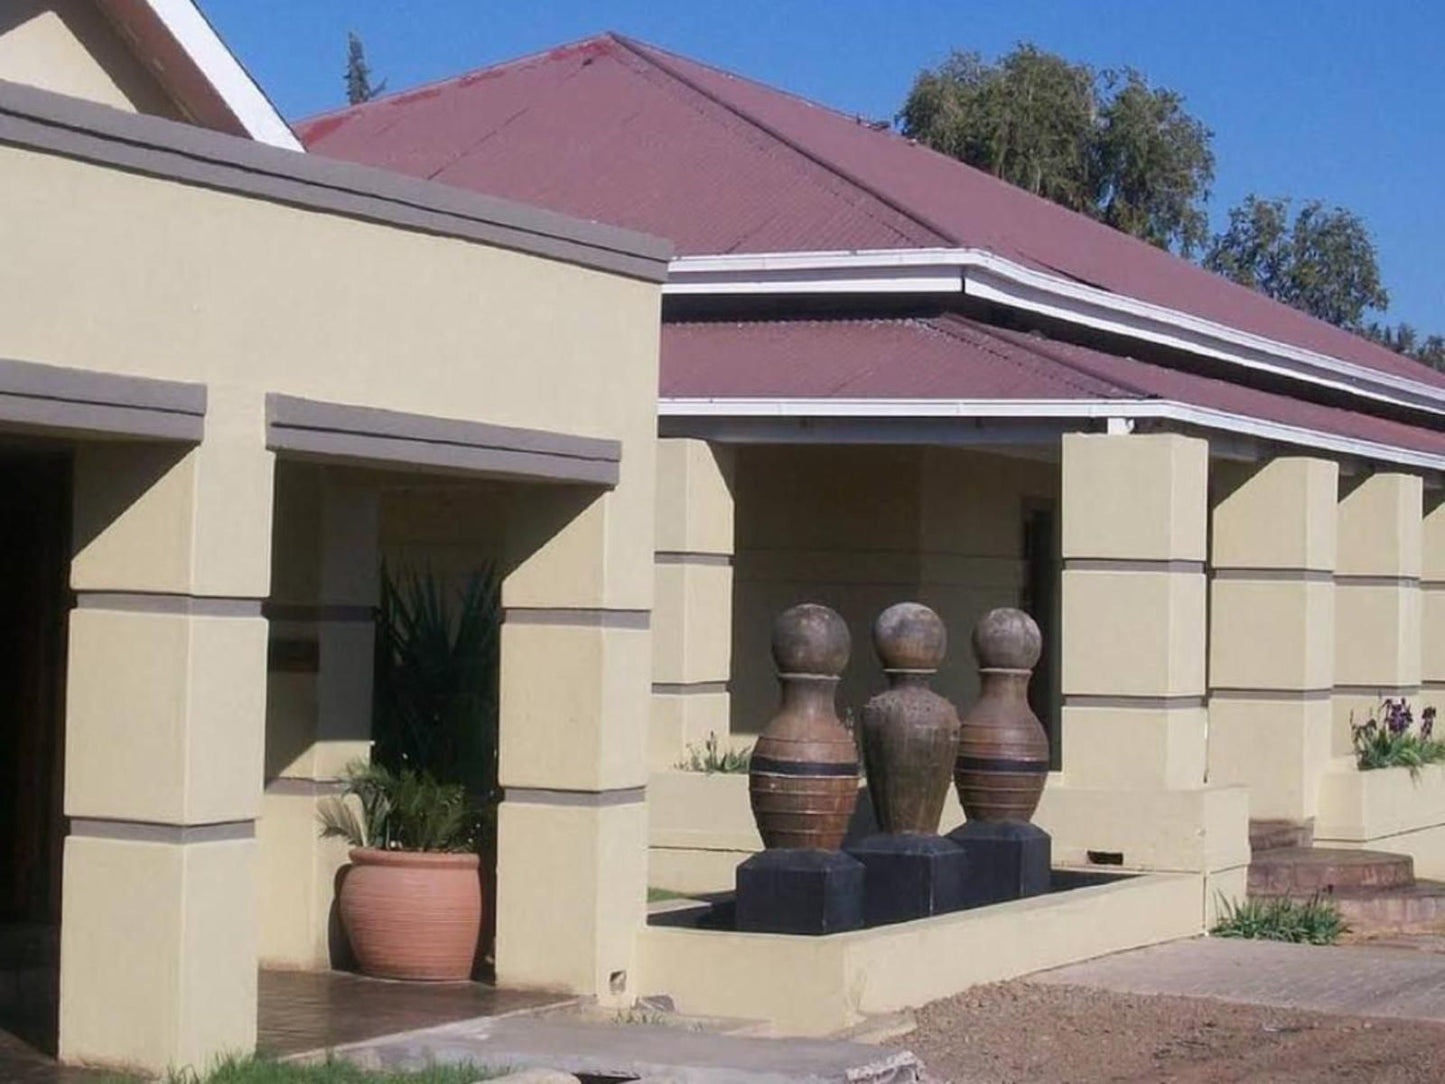 Times Premier Town Lodge Vryburg North West Province South Africa House, Building, Architecture, Palm Tree, Plant, Nature, Wood